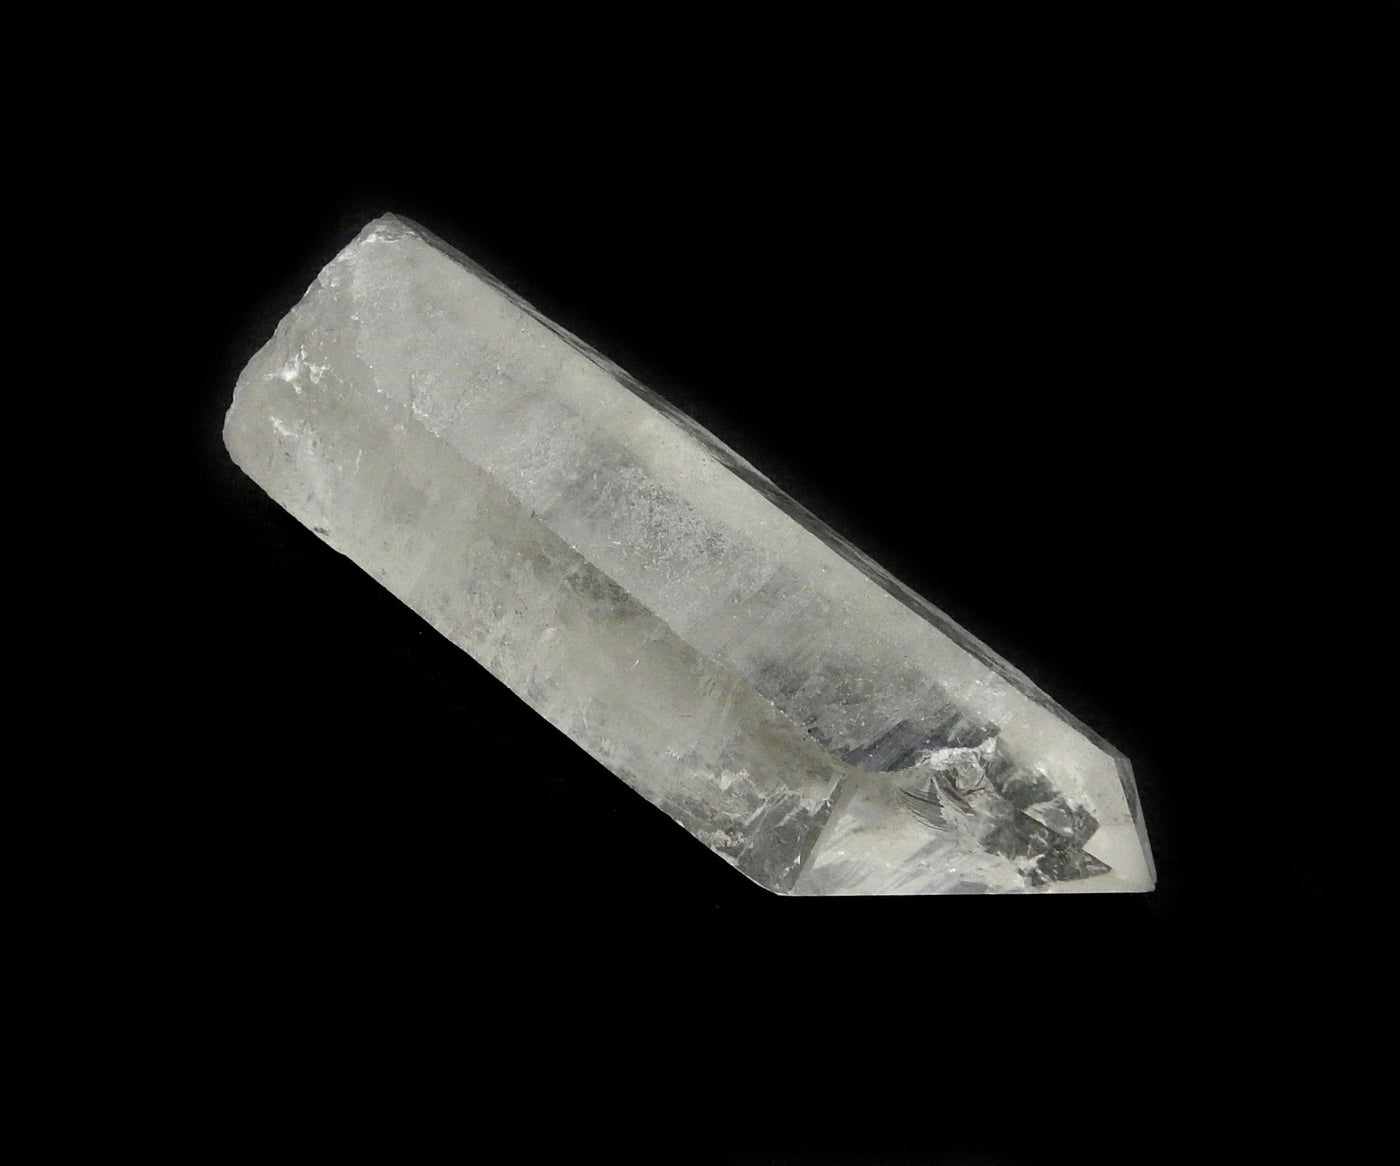 Crystal Quartz - Crystal Point 8-12cm - Grade A - Brazilian Crystals - Jewelry Supplies - Wire Wrapping - Chakra Crystals (OB10B10)